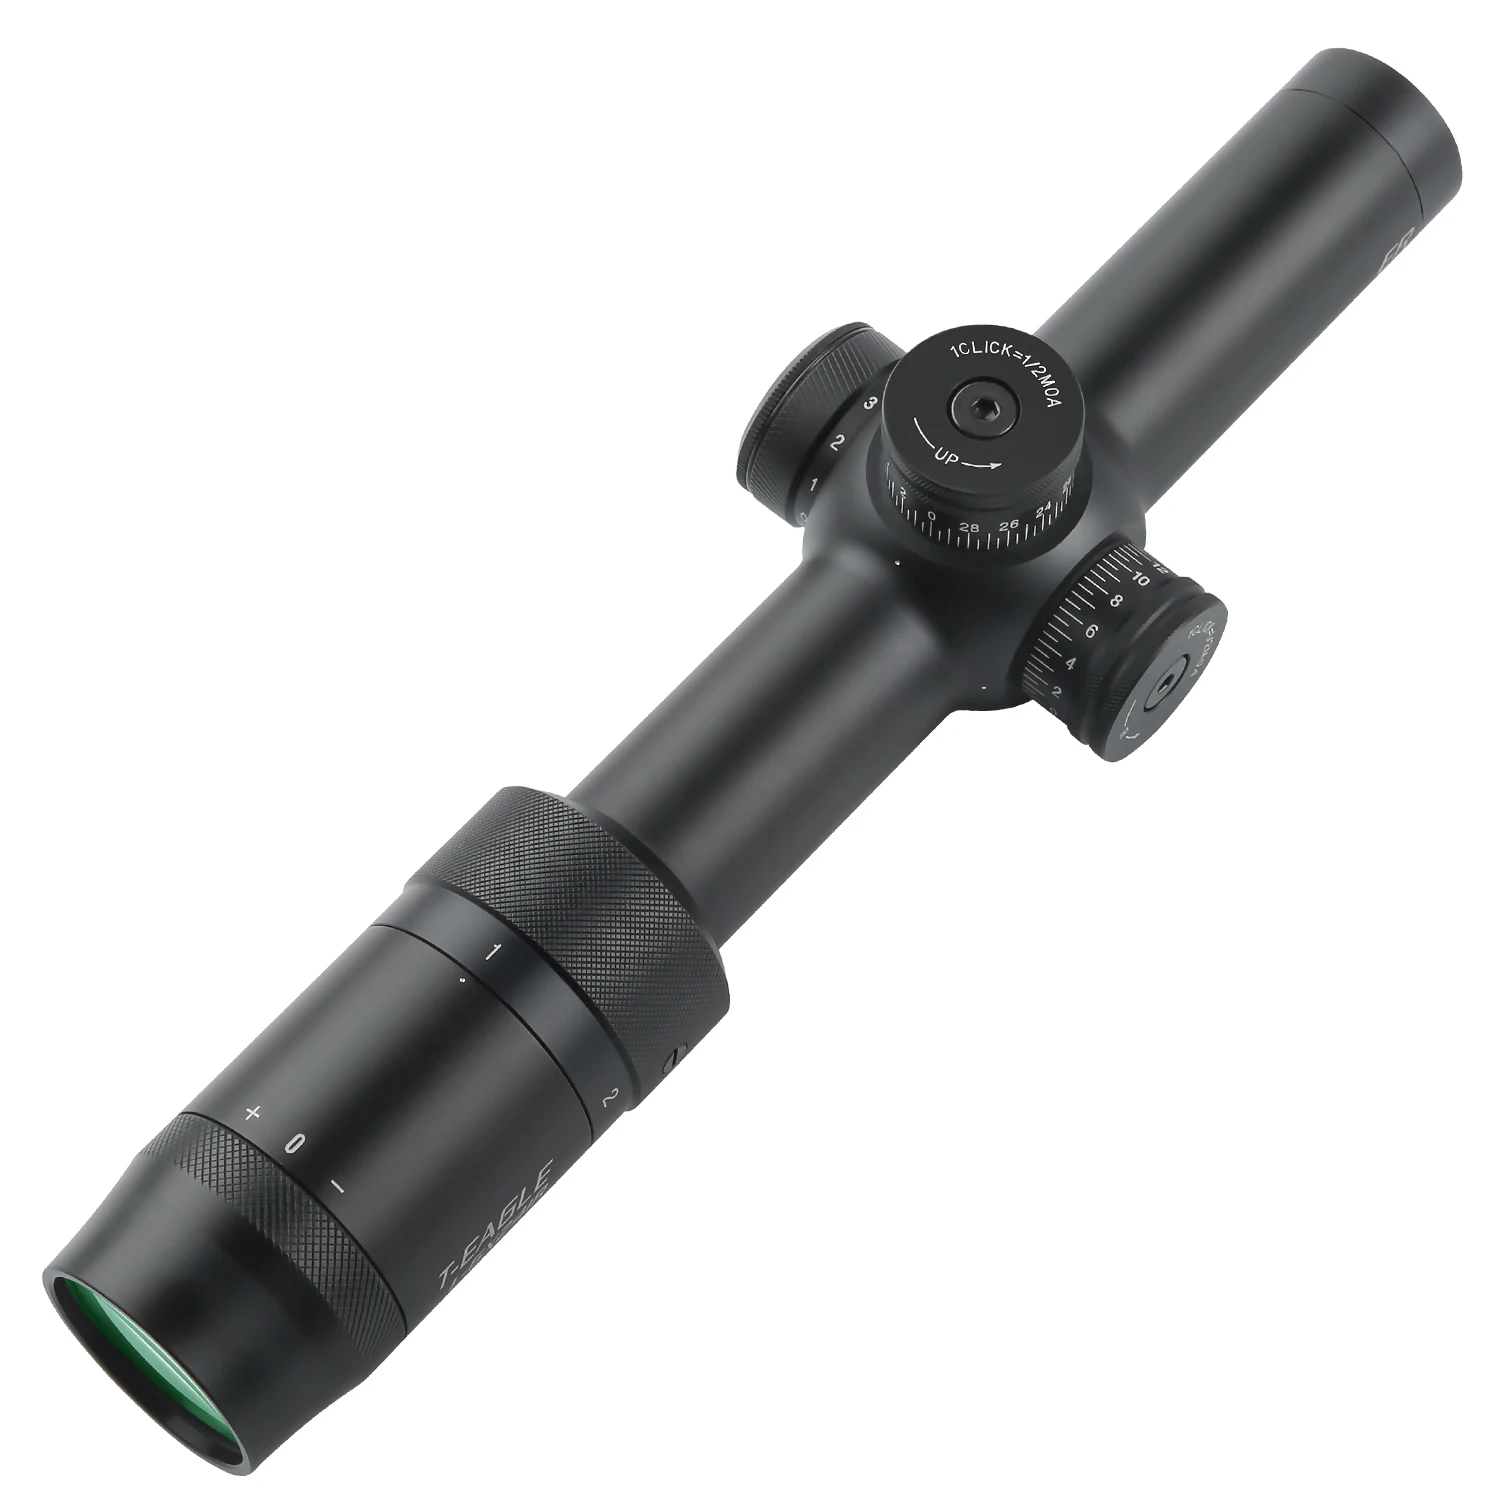 T-EAGLE ER 1-6X24IR Green Red Illuminated Fast aim tactical sniper optical sights for pcp airgun